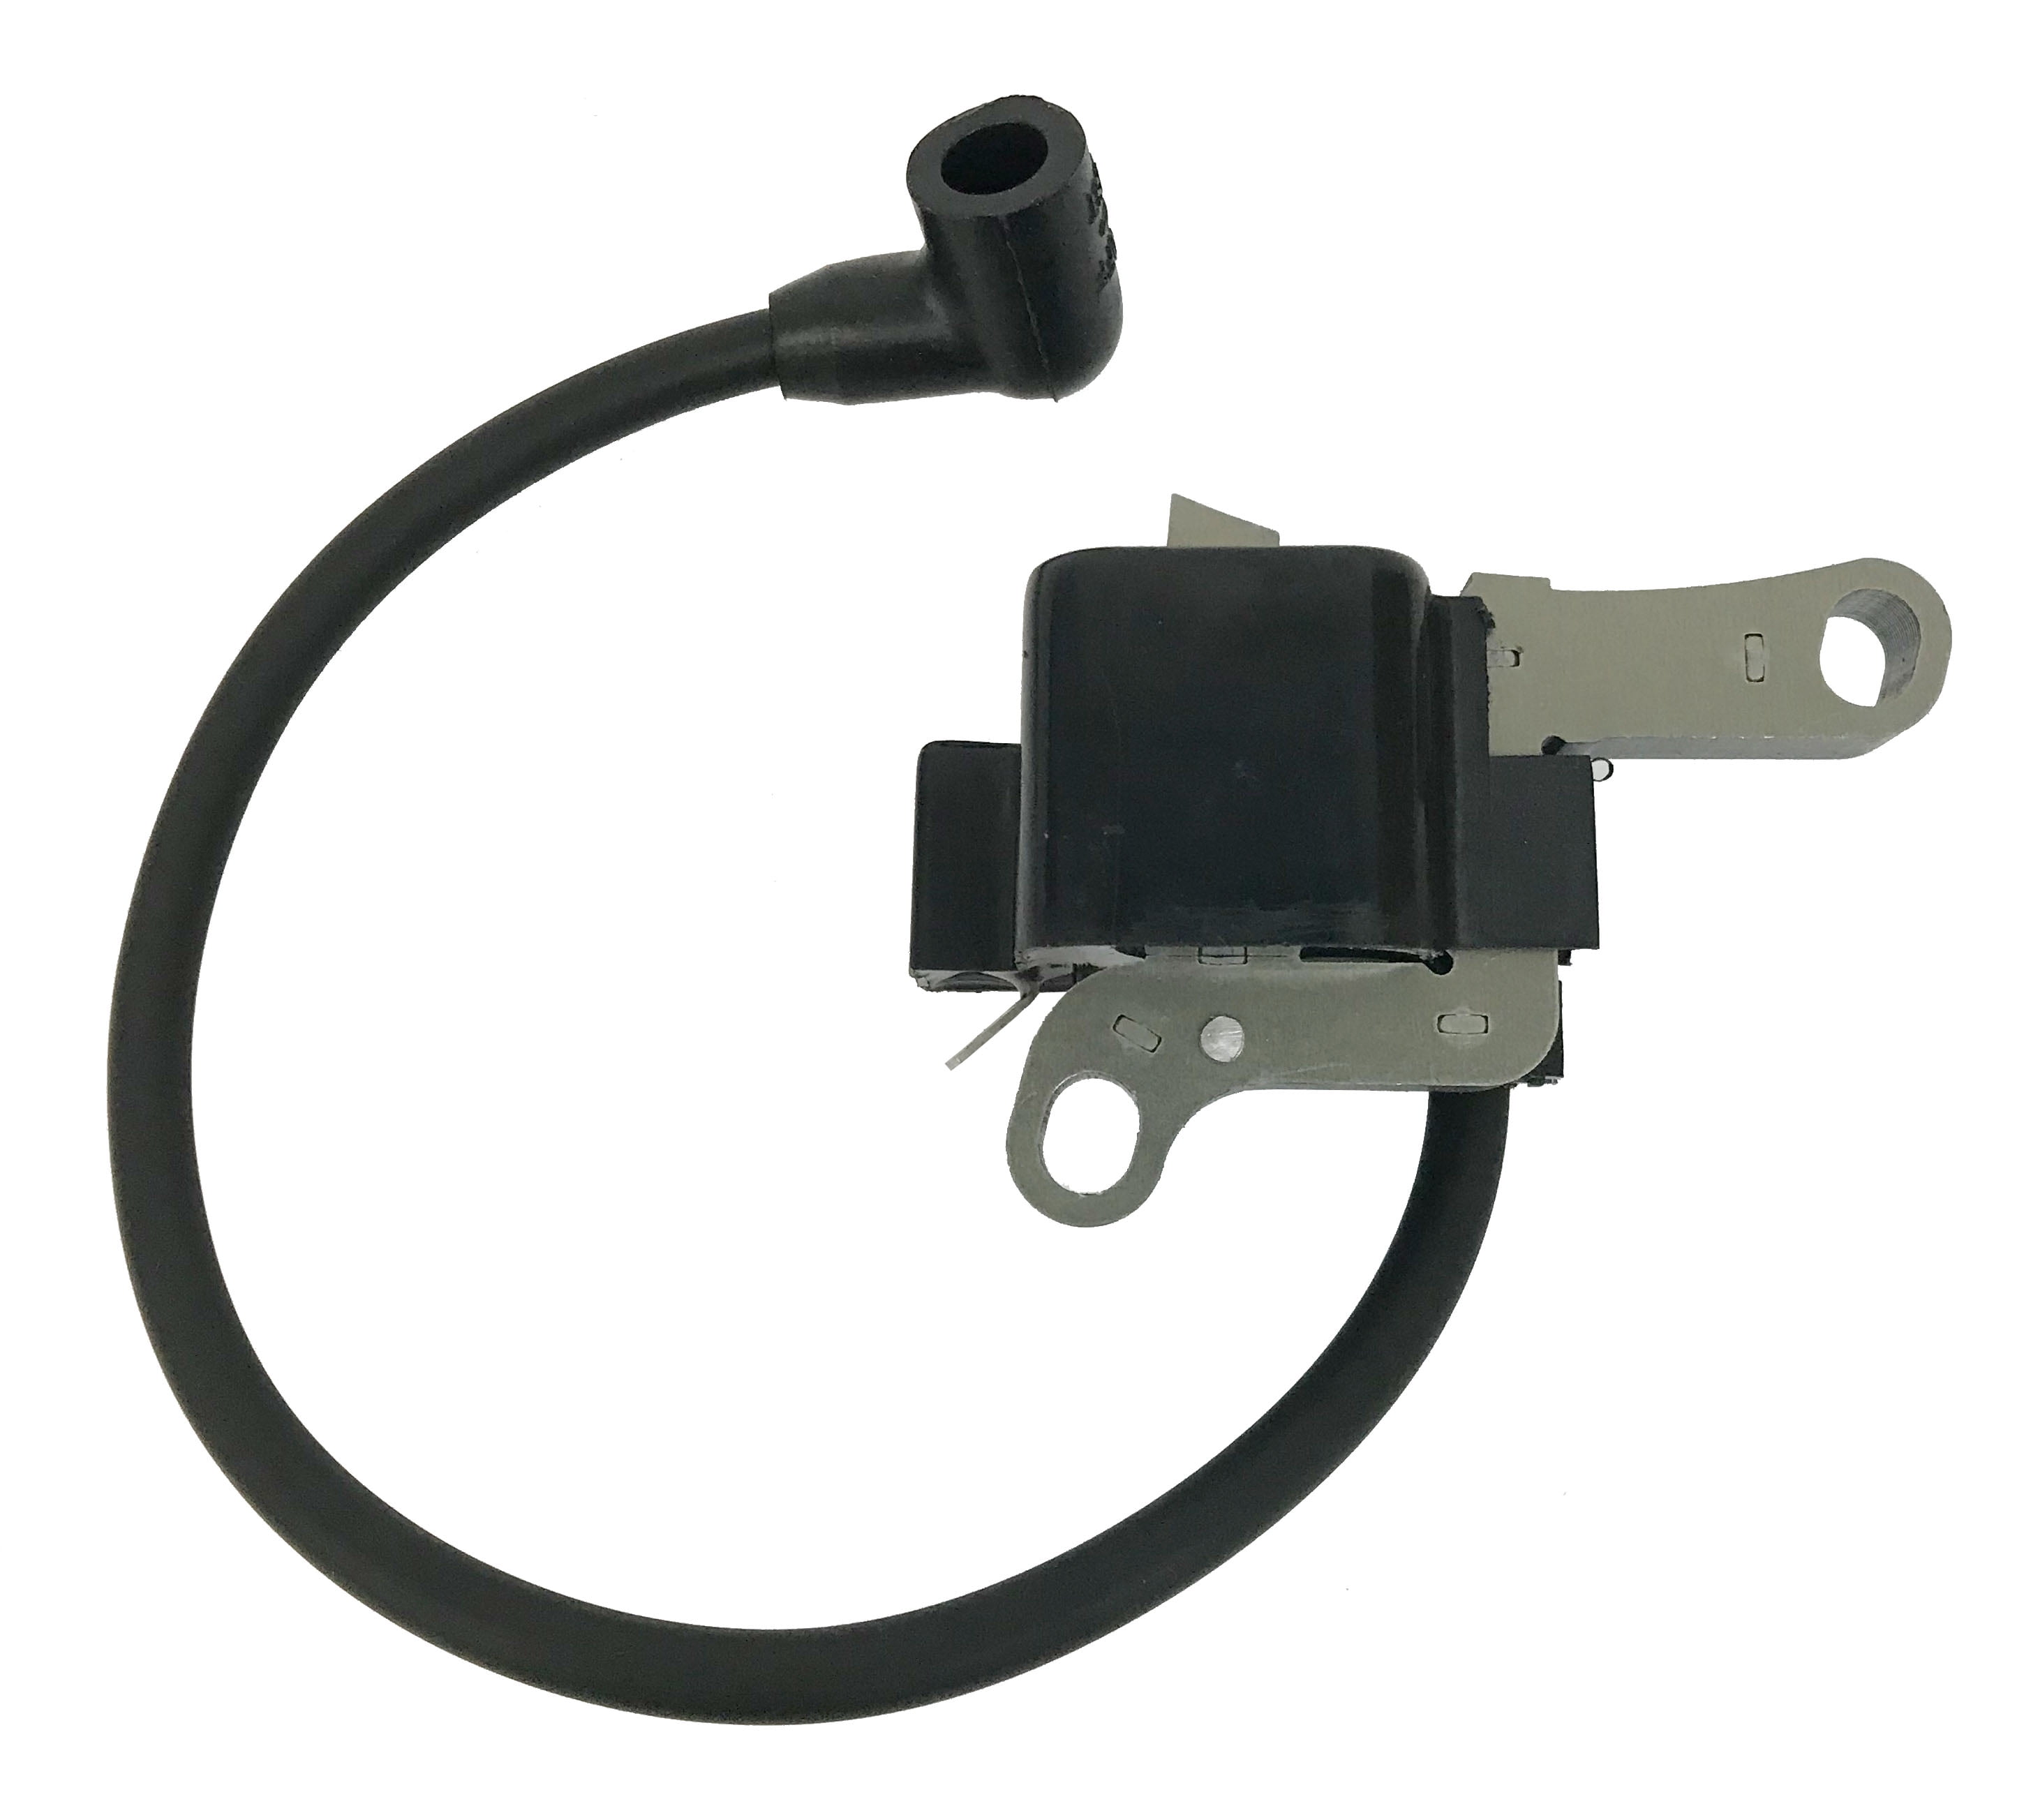 Replacement Accessories Baoblaze Ignition Coil for Lawn Boy Module 99-2916 99-2911 92-1152 684048 684049 10552 10915 10924 10928